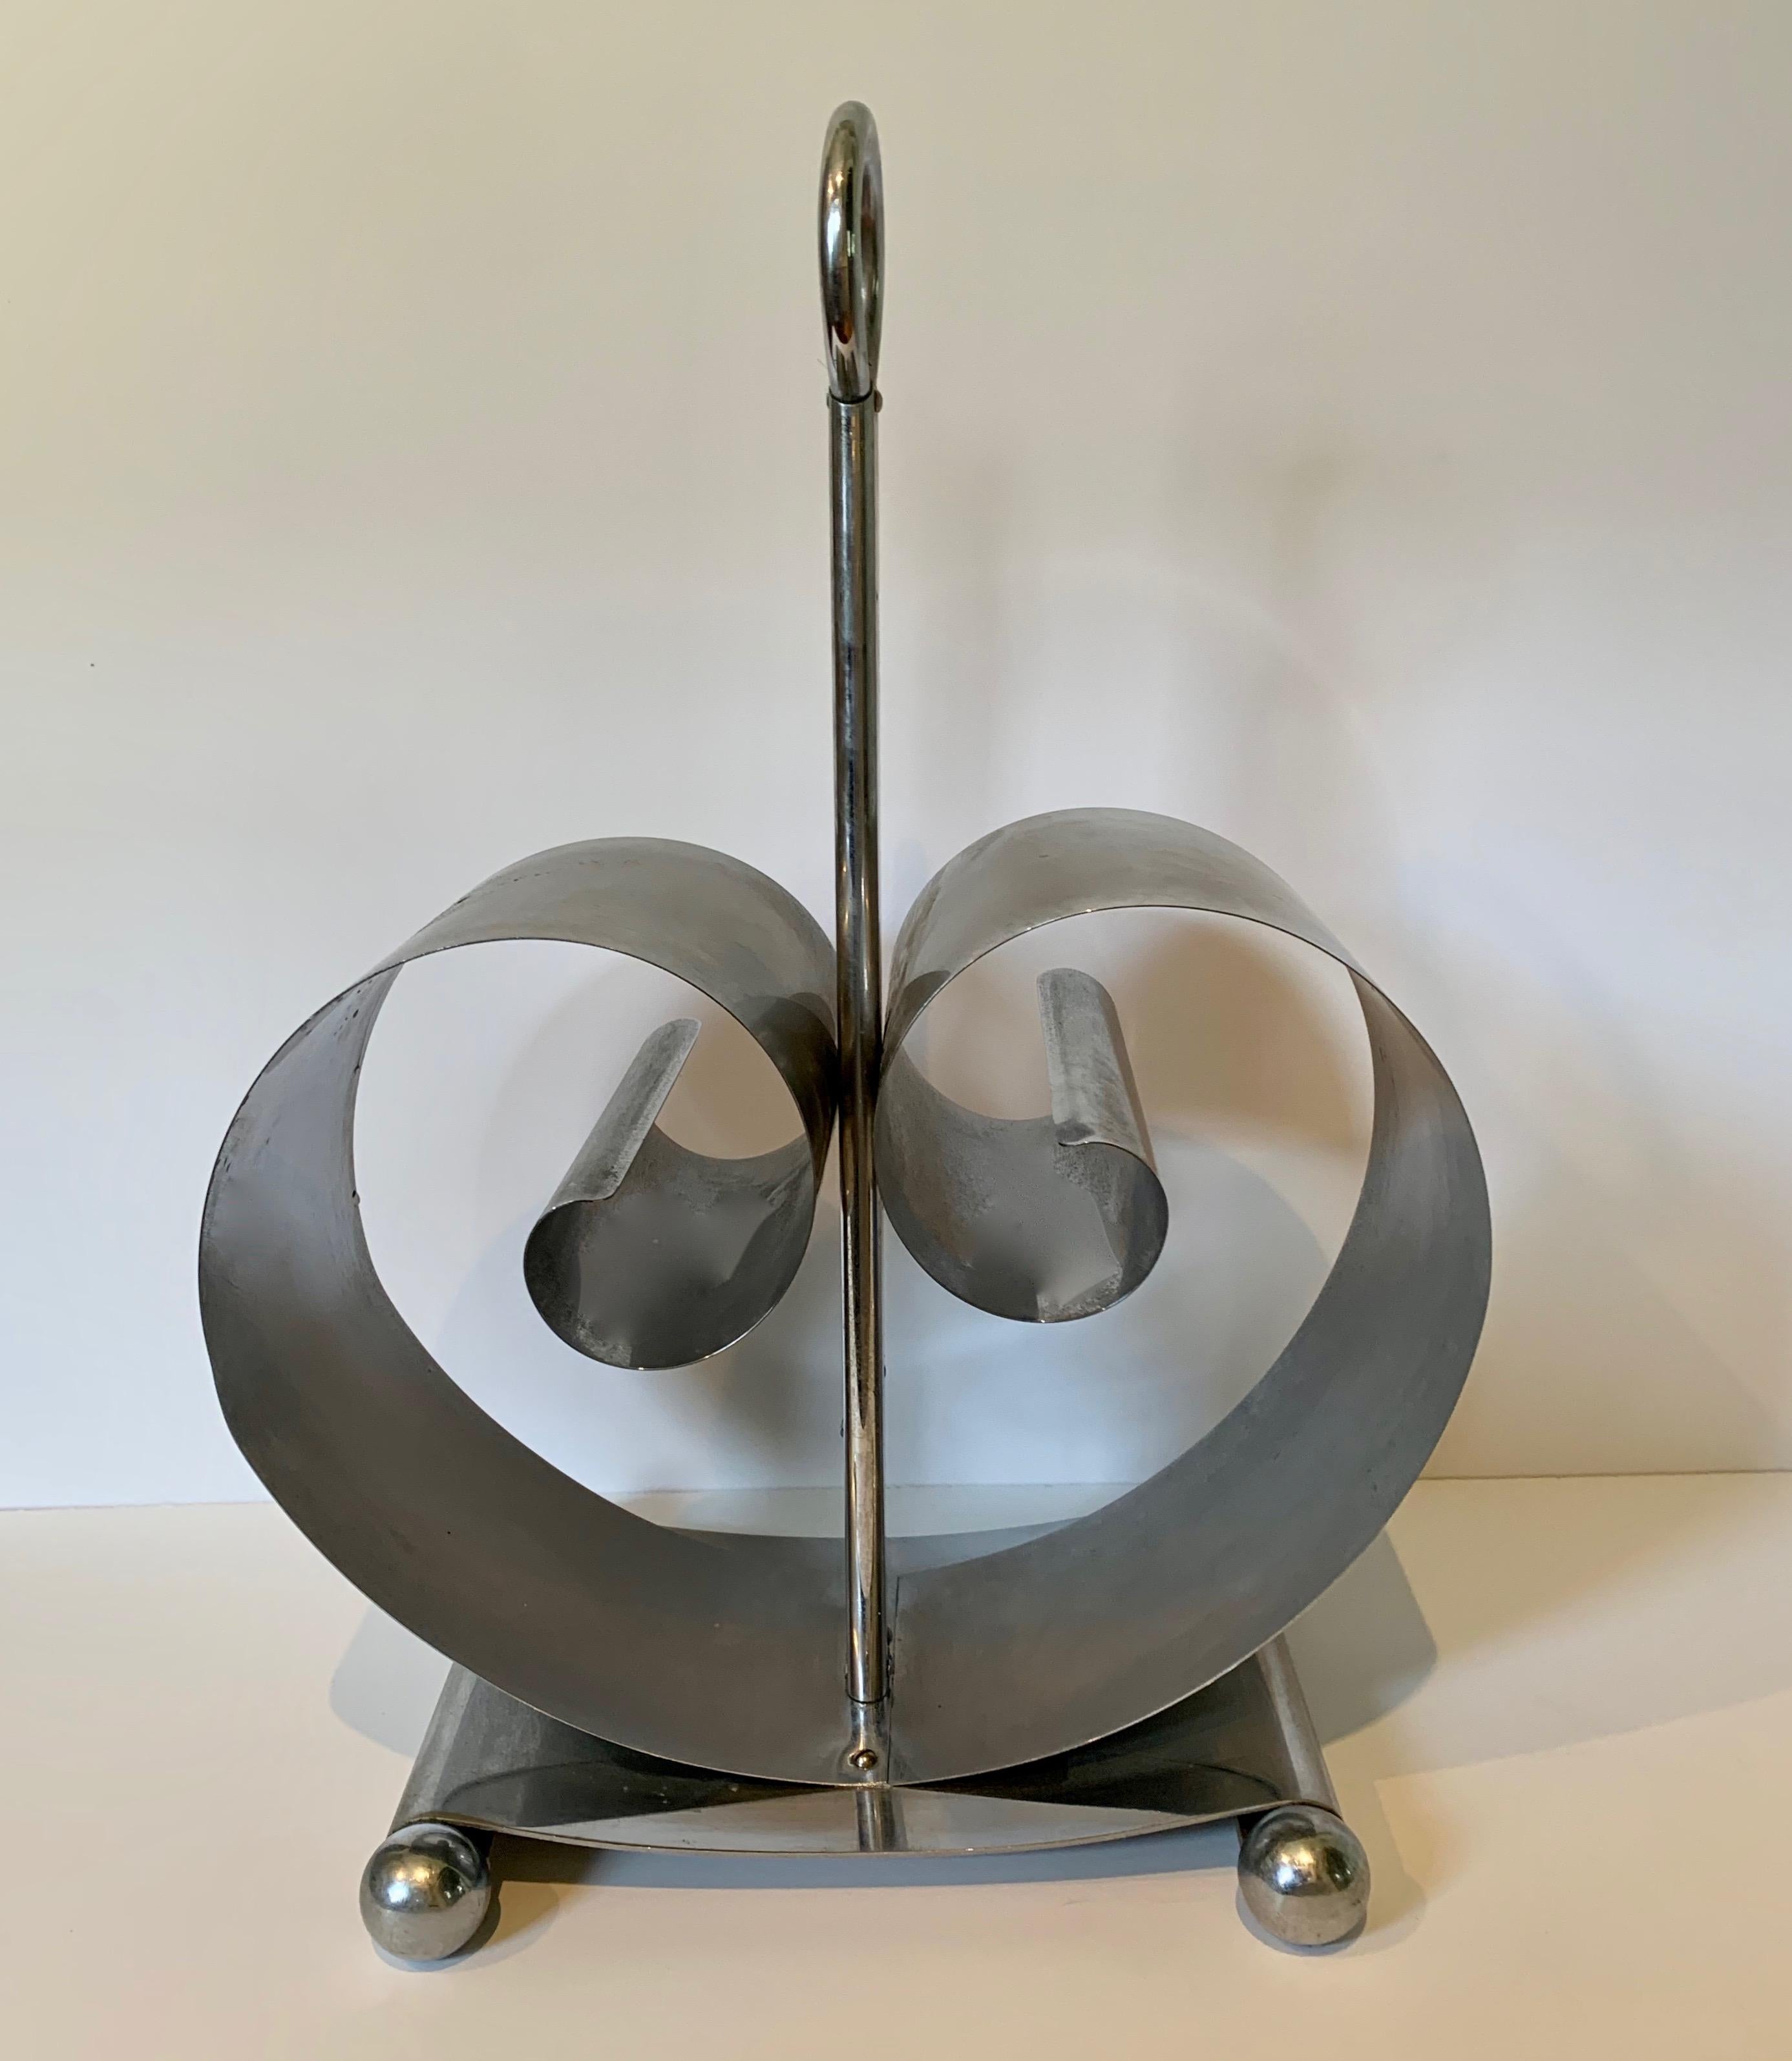 Norman Bel Geddes Chrome magazine rack, the curled sides expand depending on the number of magazines or books within each side.

A wonderful for addition to midcentury, modern and especially Art Deco Design - elegant and sophisticated design.